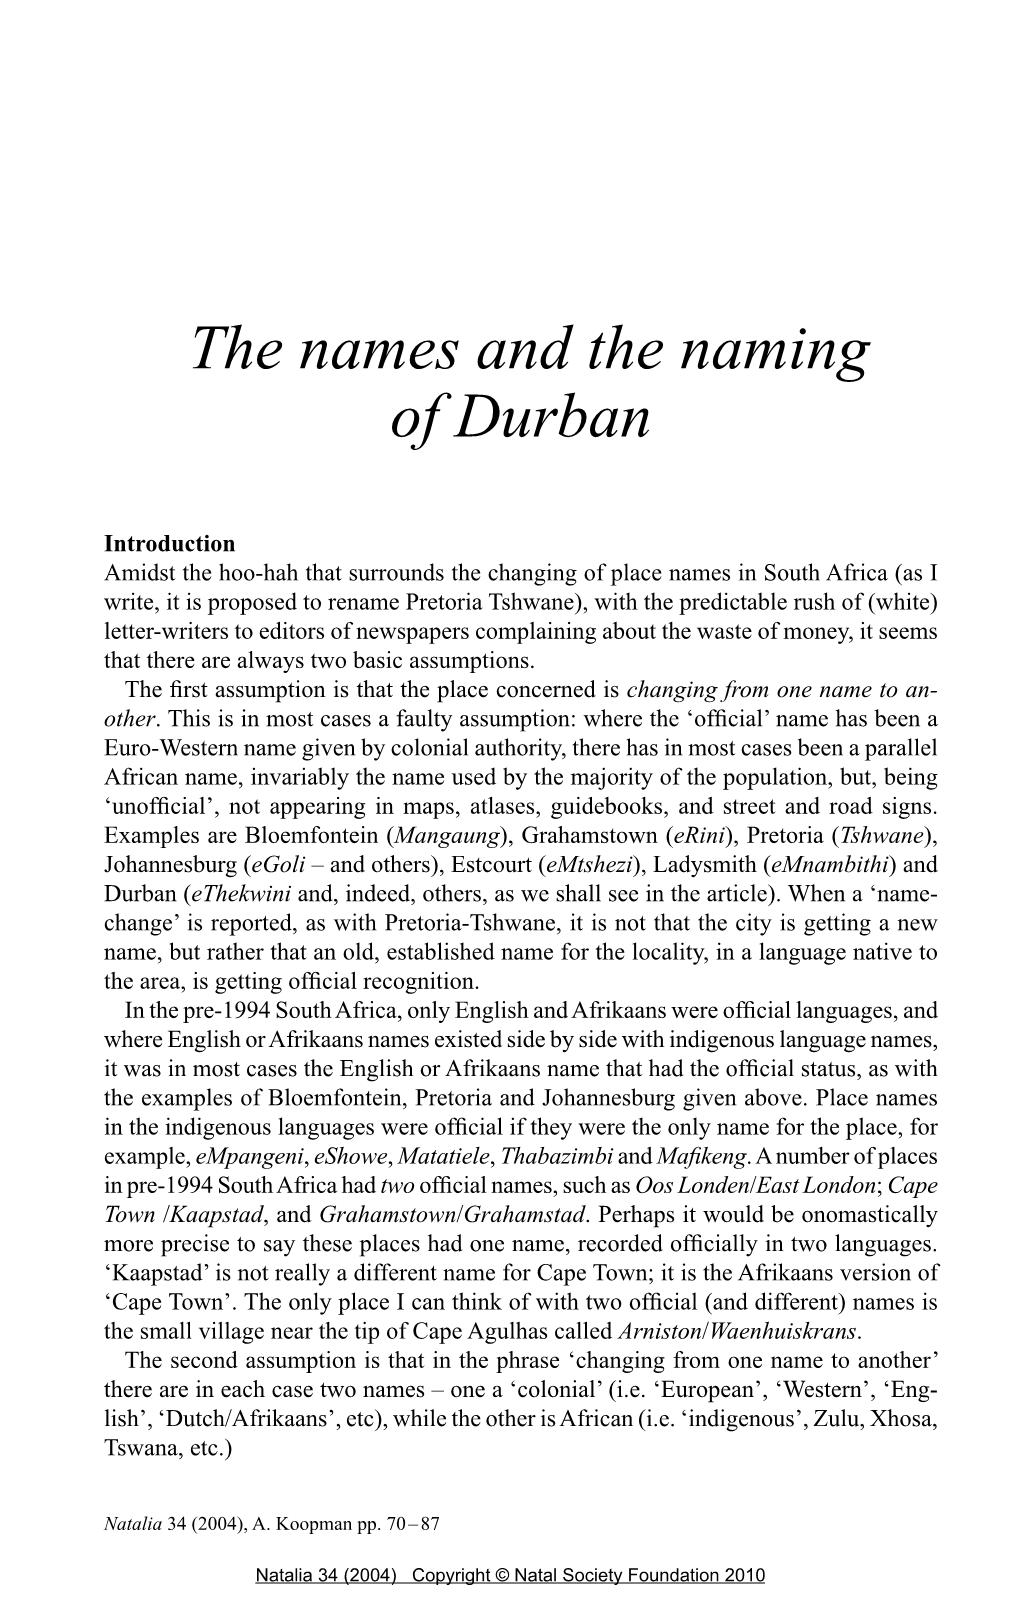 The Names and the Naming of Durban Adrian Koopman